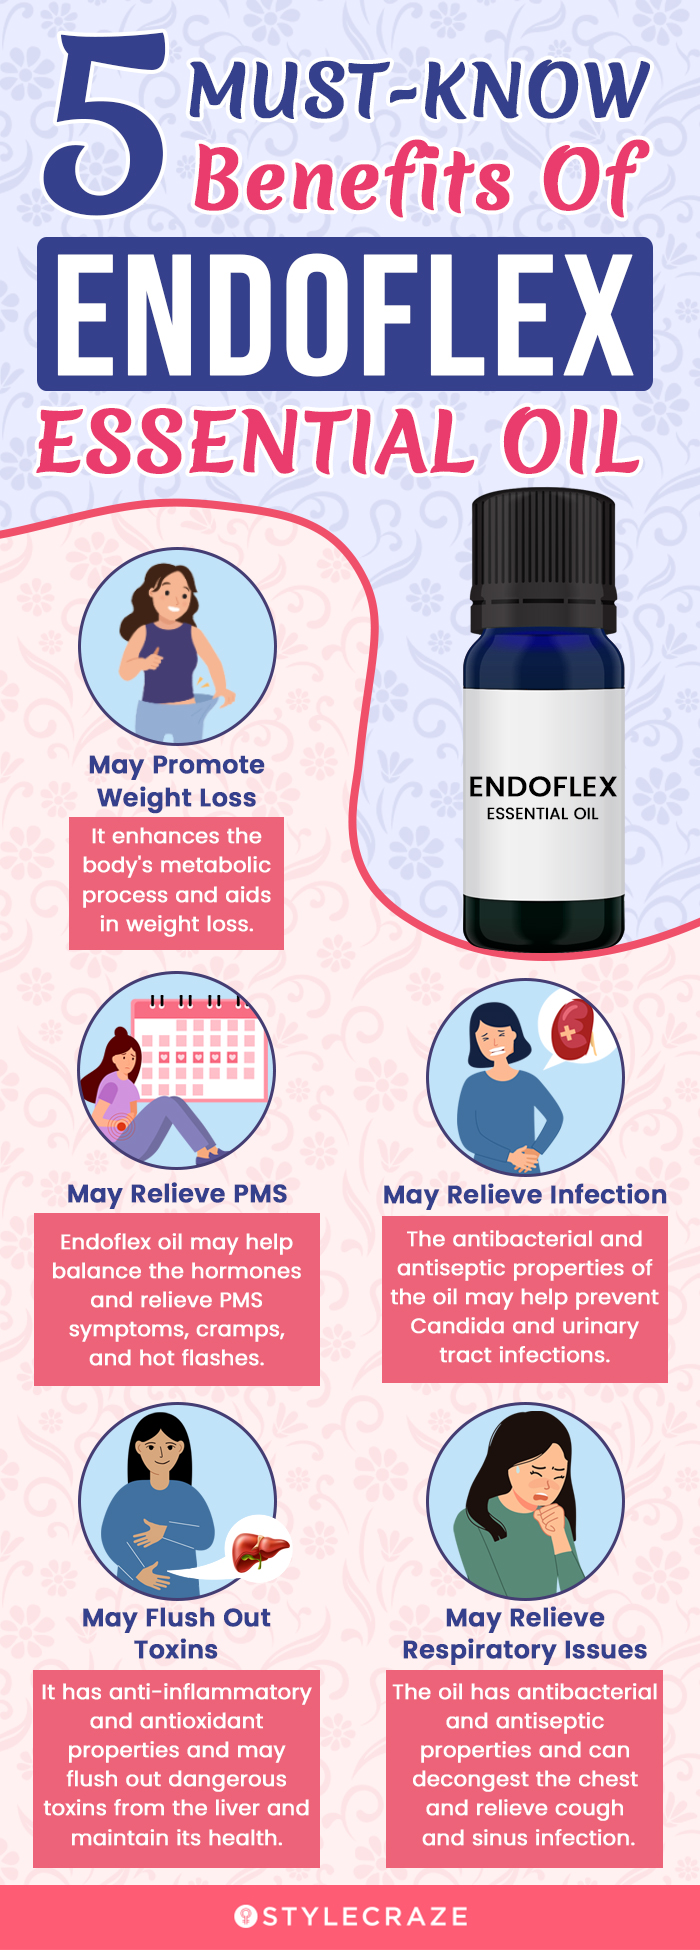 5 must know benefits of endoflex essential oil [infographic]